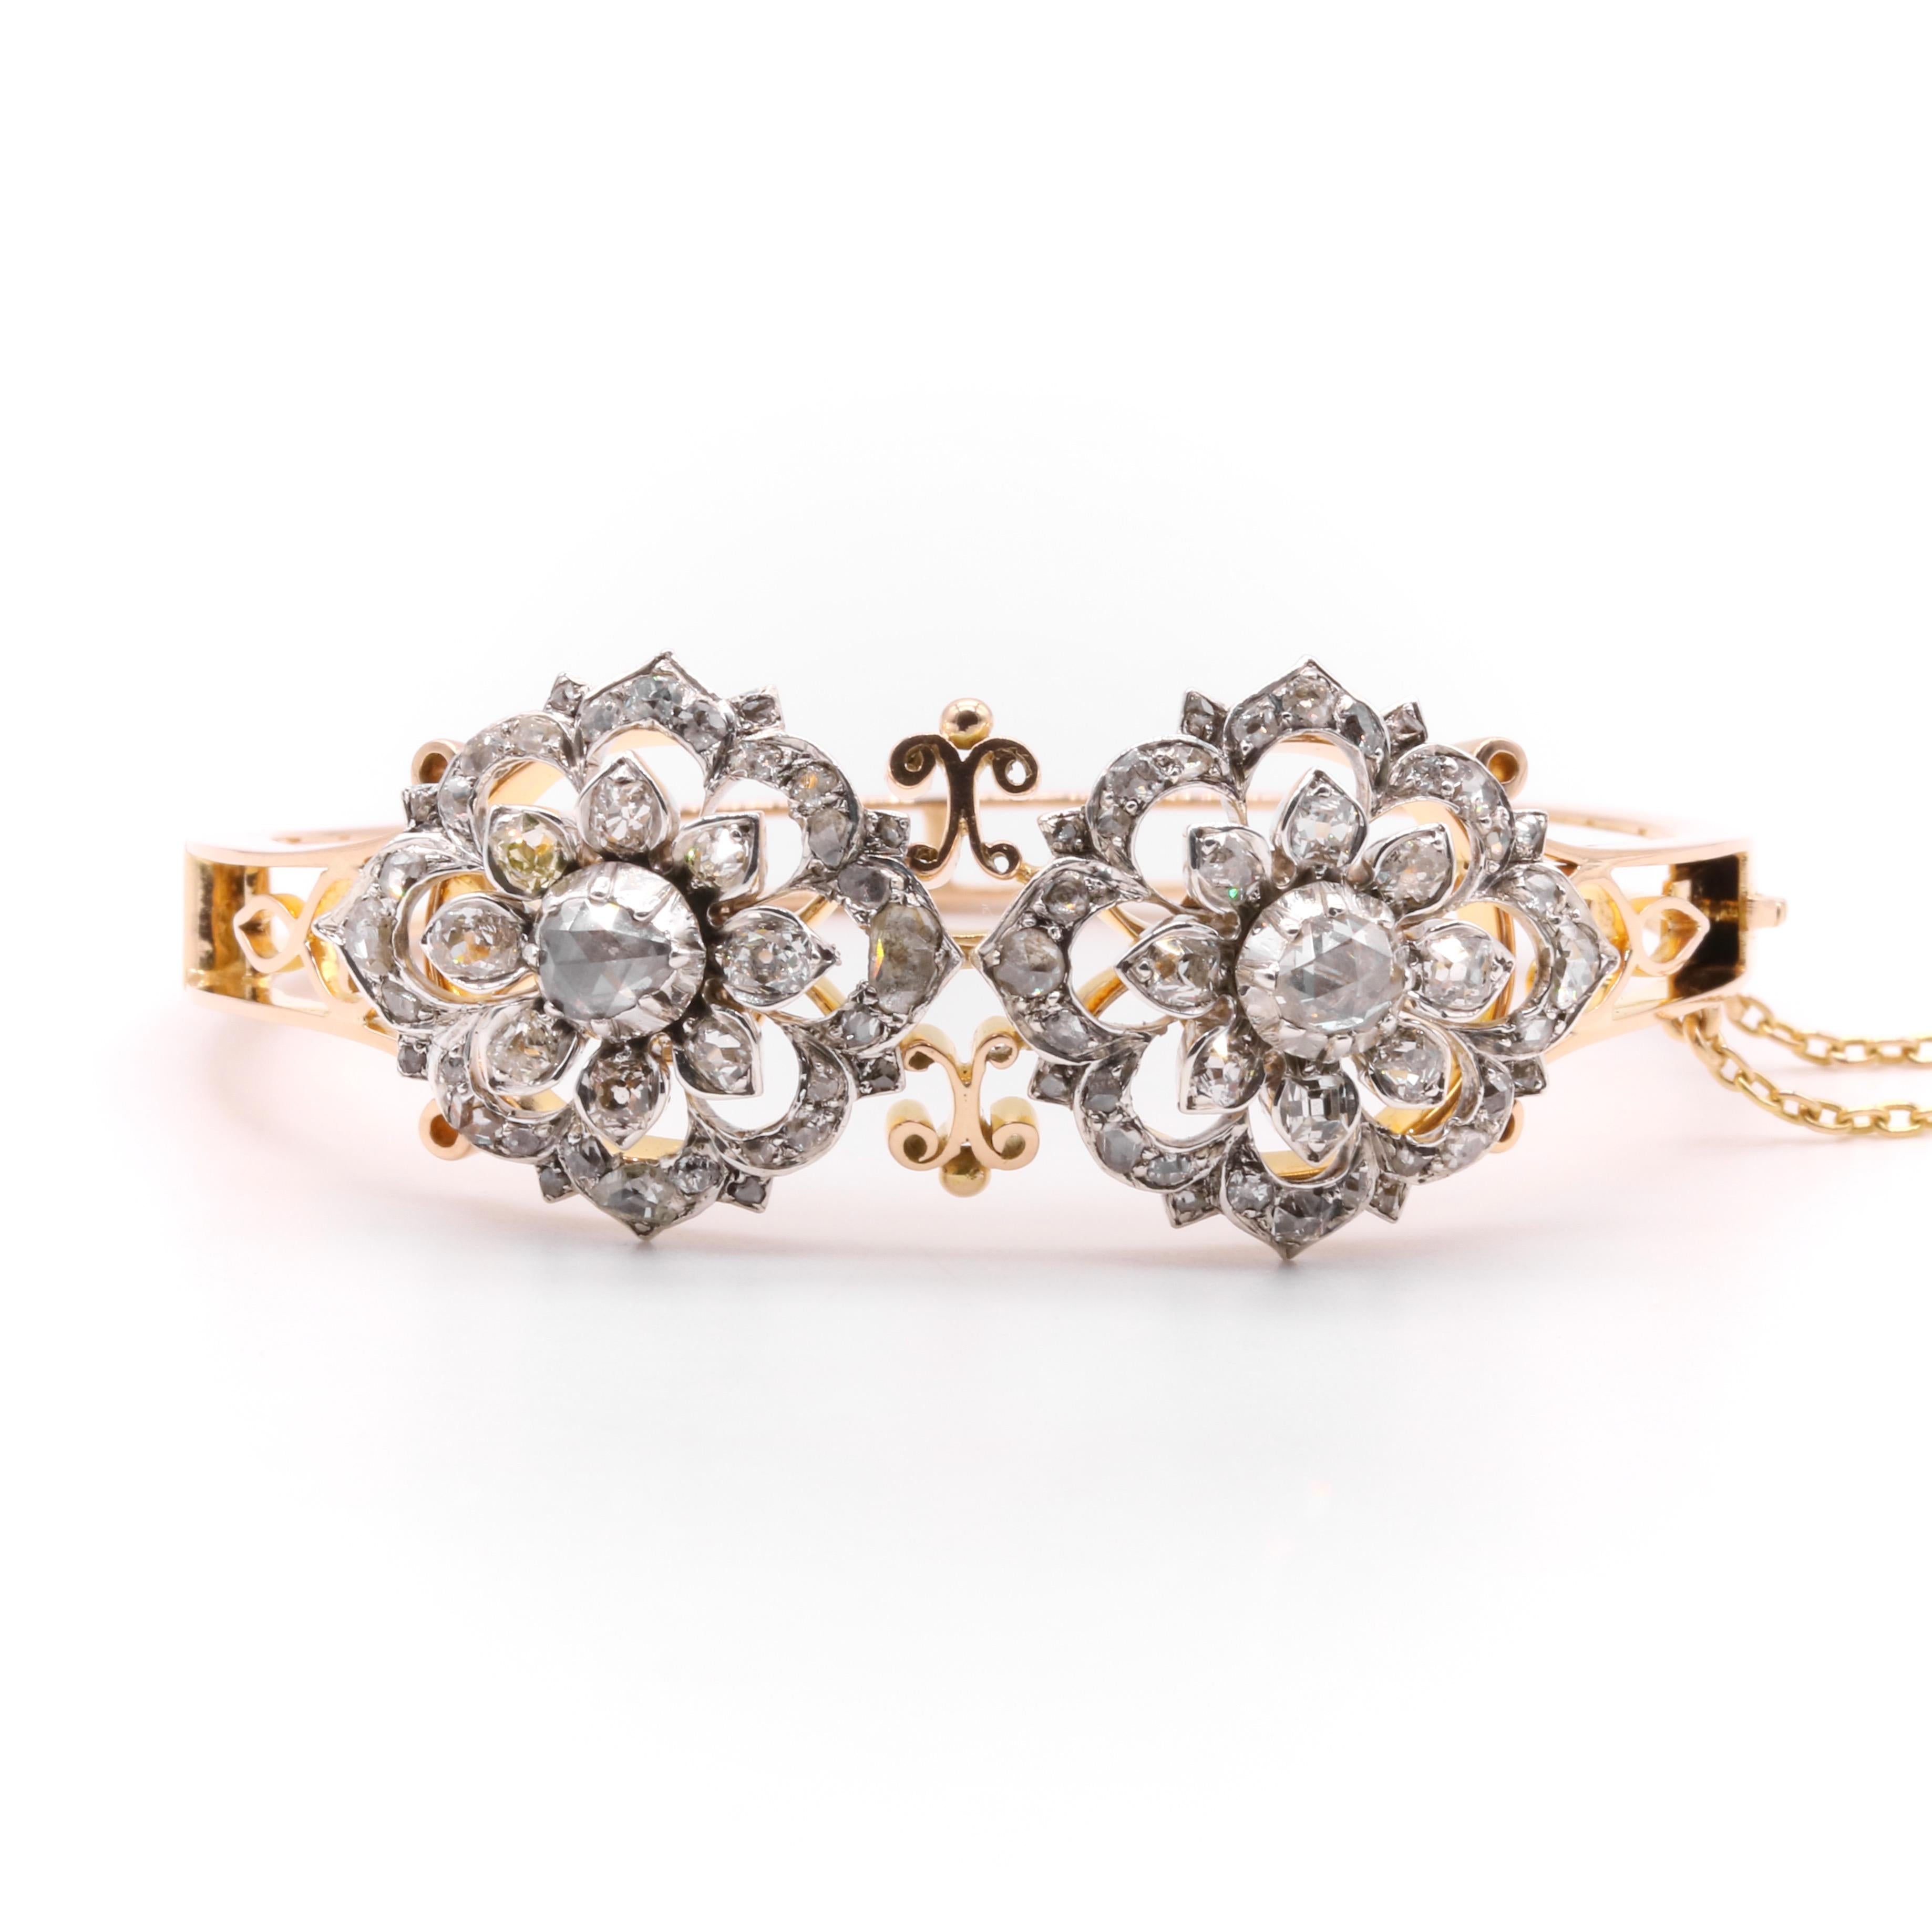 A Victorian diamond, silver, and yellow gold bangle, comprising two detachable brooch fittings each comprising one large rose cut diamond, and forty old mine cut and rose cut diamonds, set in silver, with an 18 karat yellow gold bangle, and 9 karat